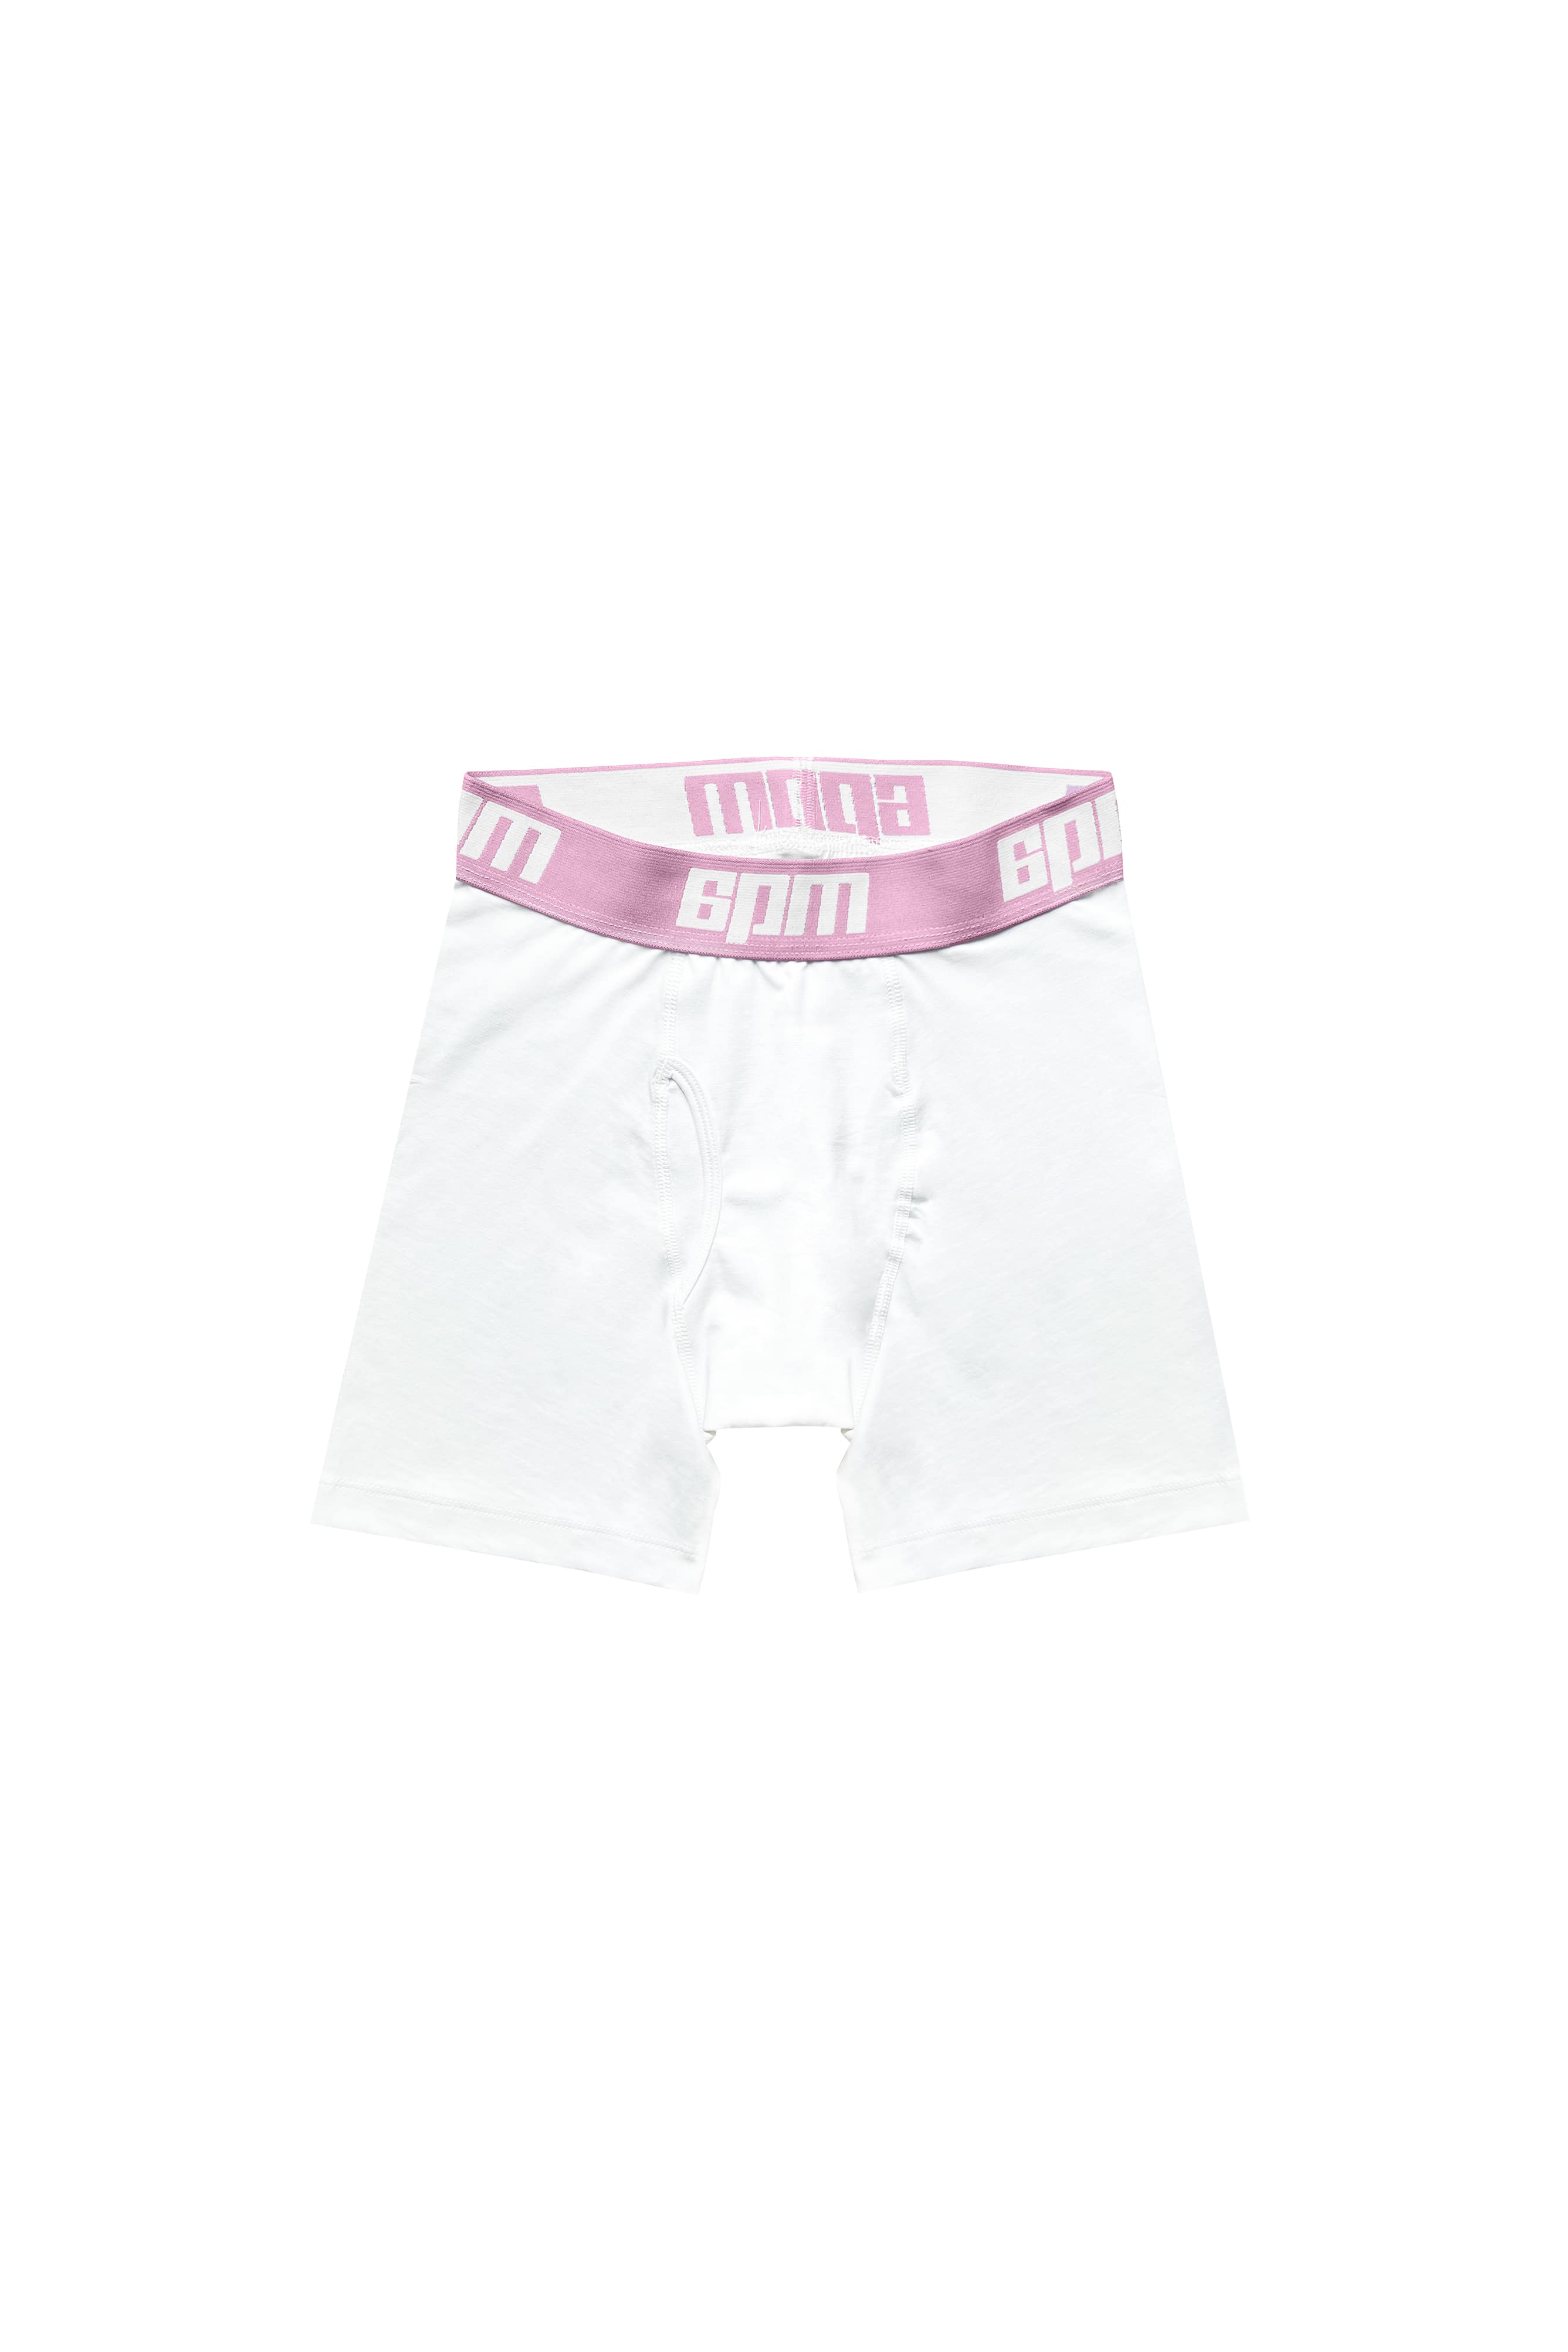 BOXER SHORTS WHITE/PINK (2-PACK)